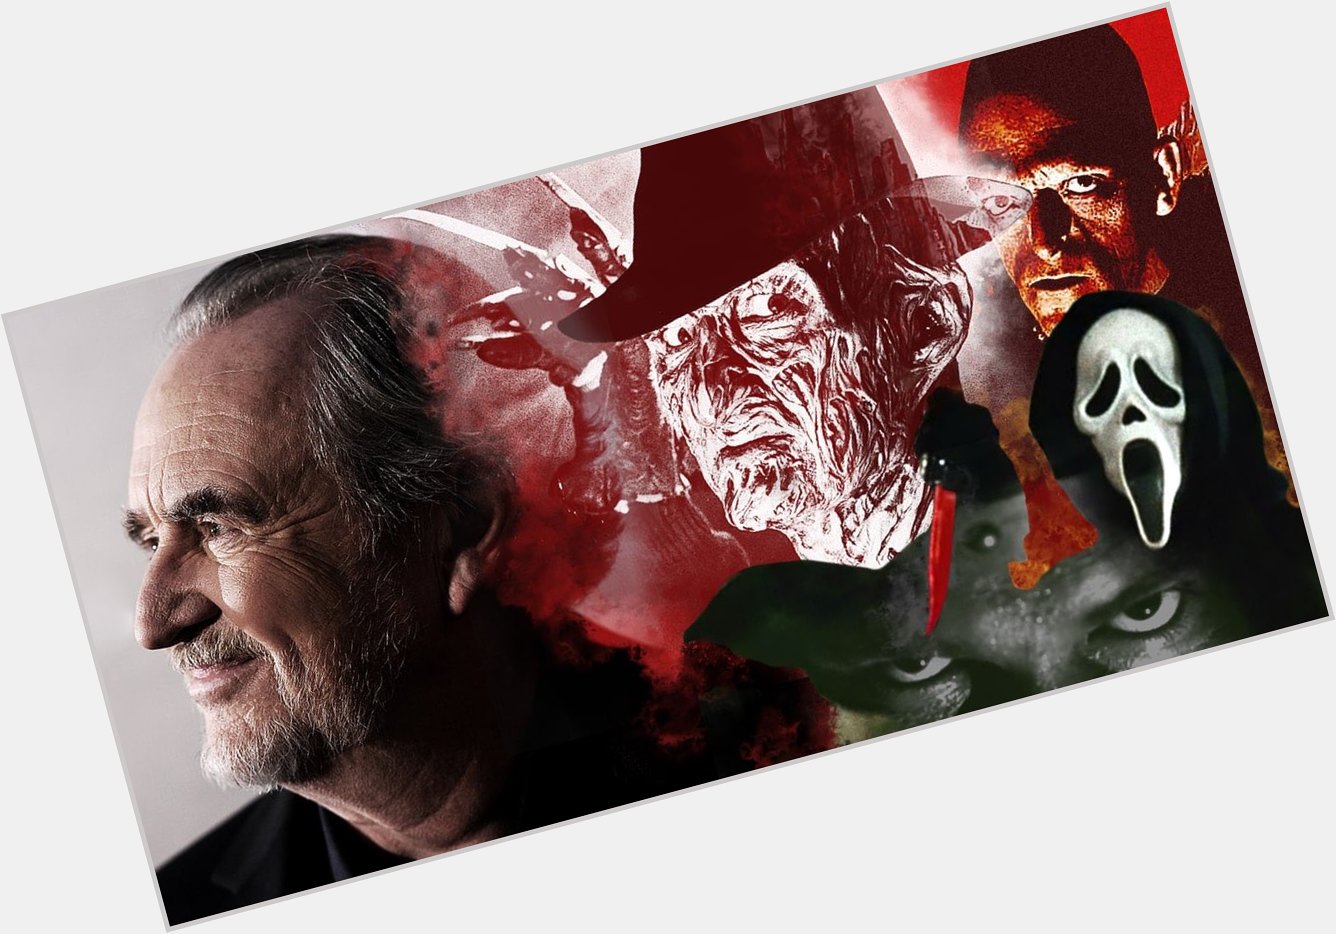 Happy belated birthday to the Horror Movie God Wes Craven who turned 78 yesterday (R.I.P). 